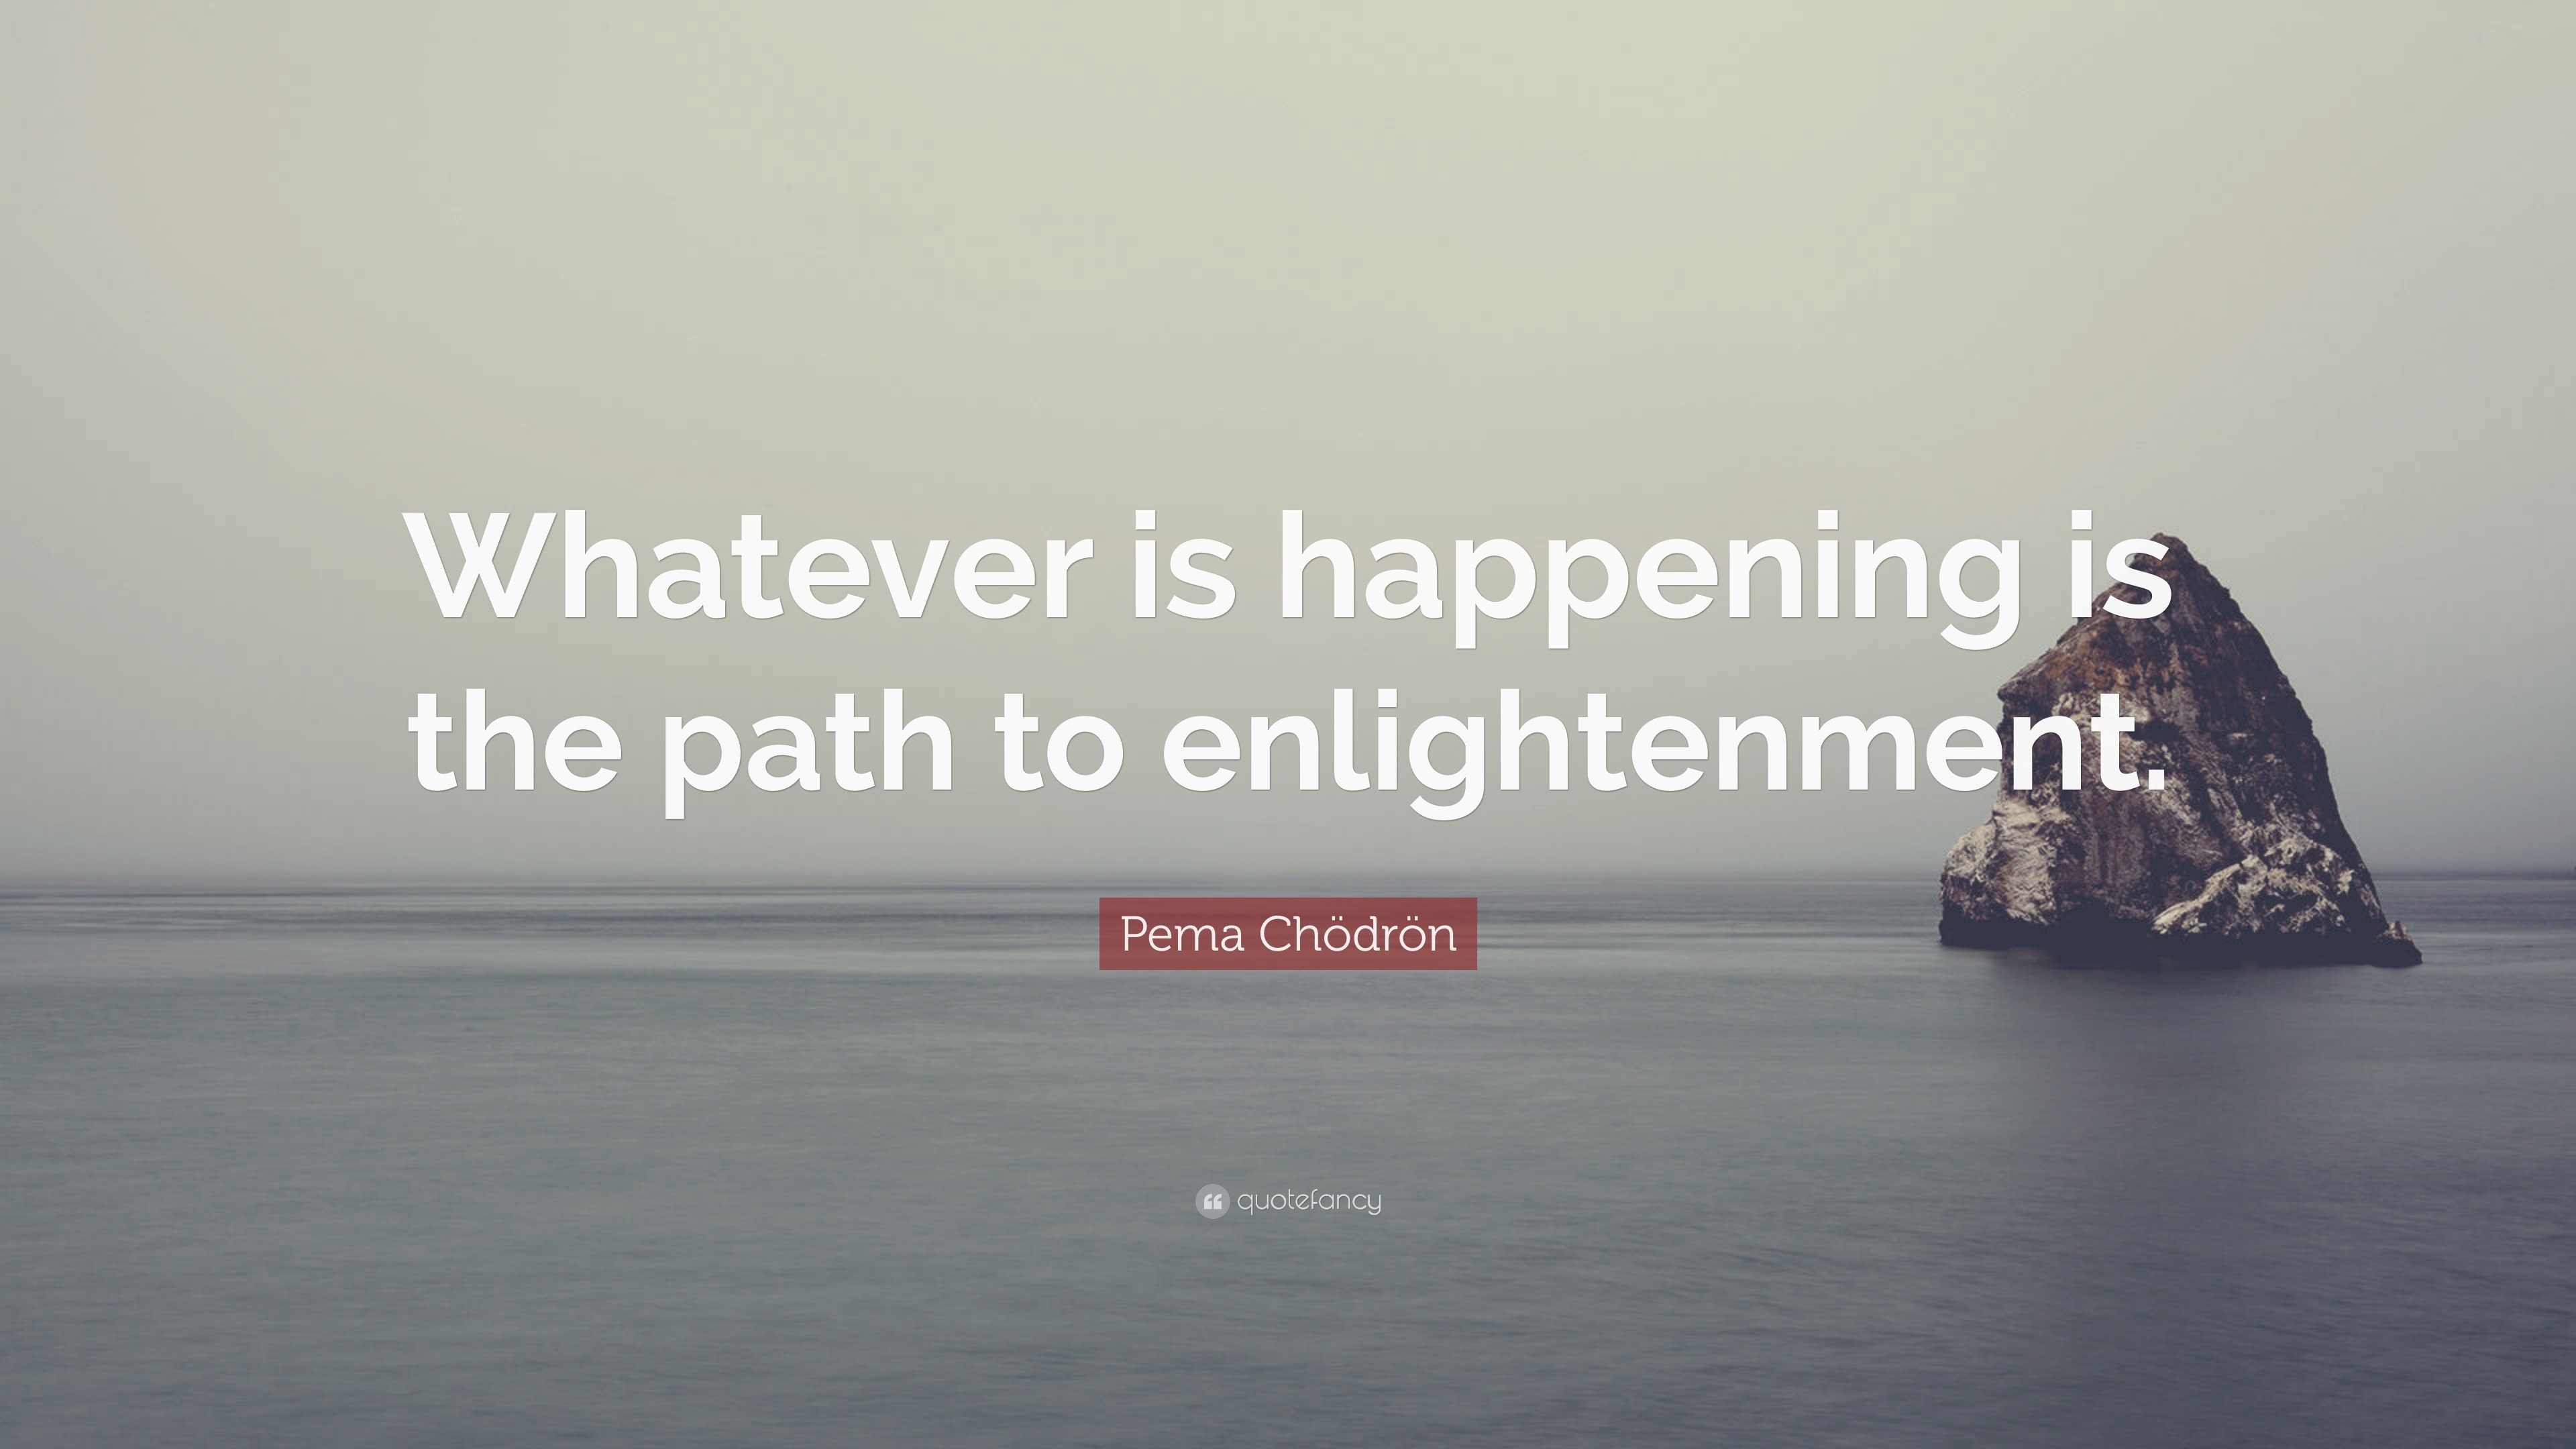 Pema Chödrön Quote: “Whatever is happening is the path to enlightenment.”